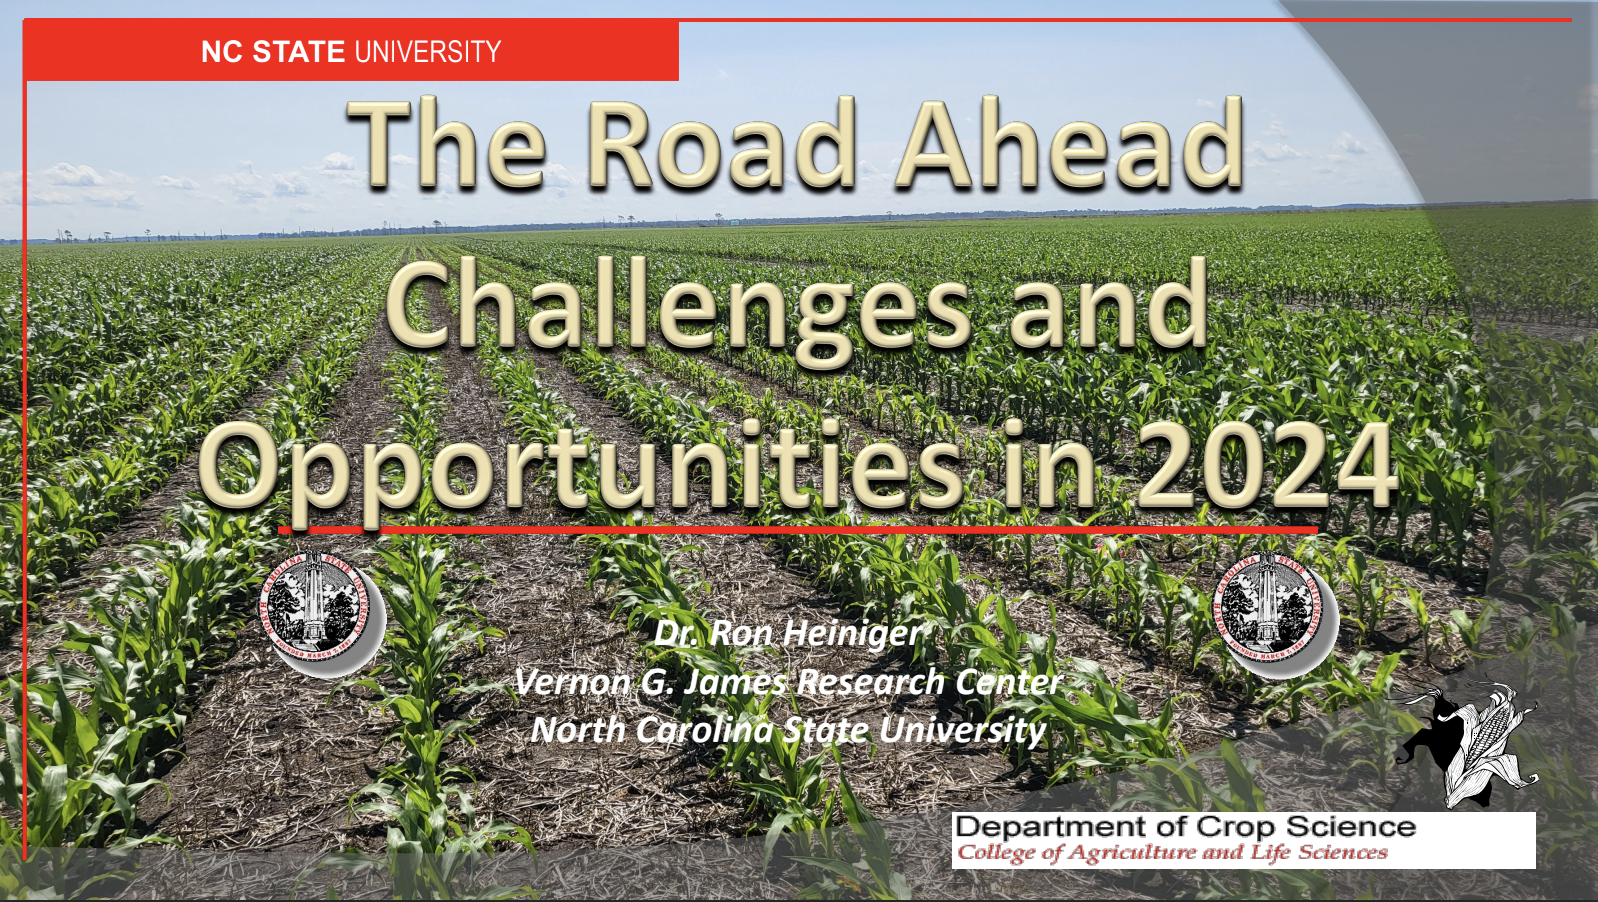 The Road Ahead Challenges and Opportunities in 2024